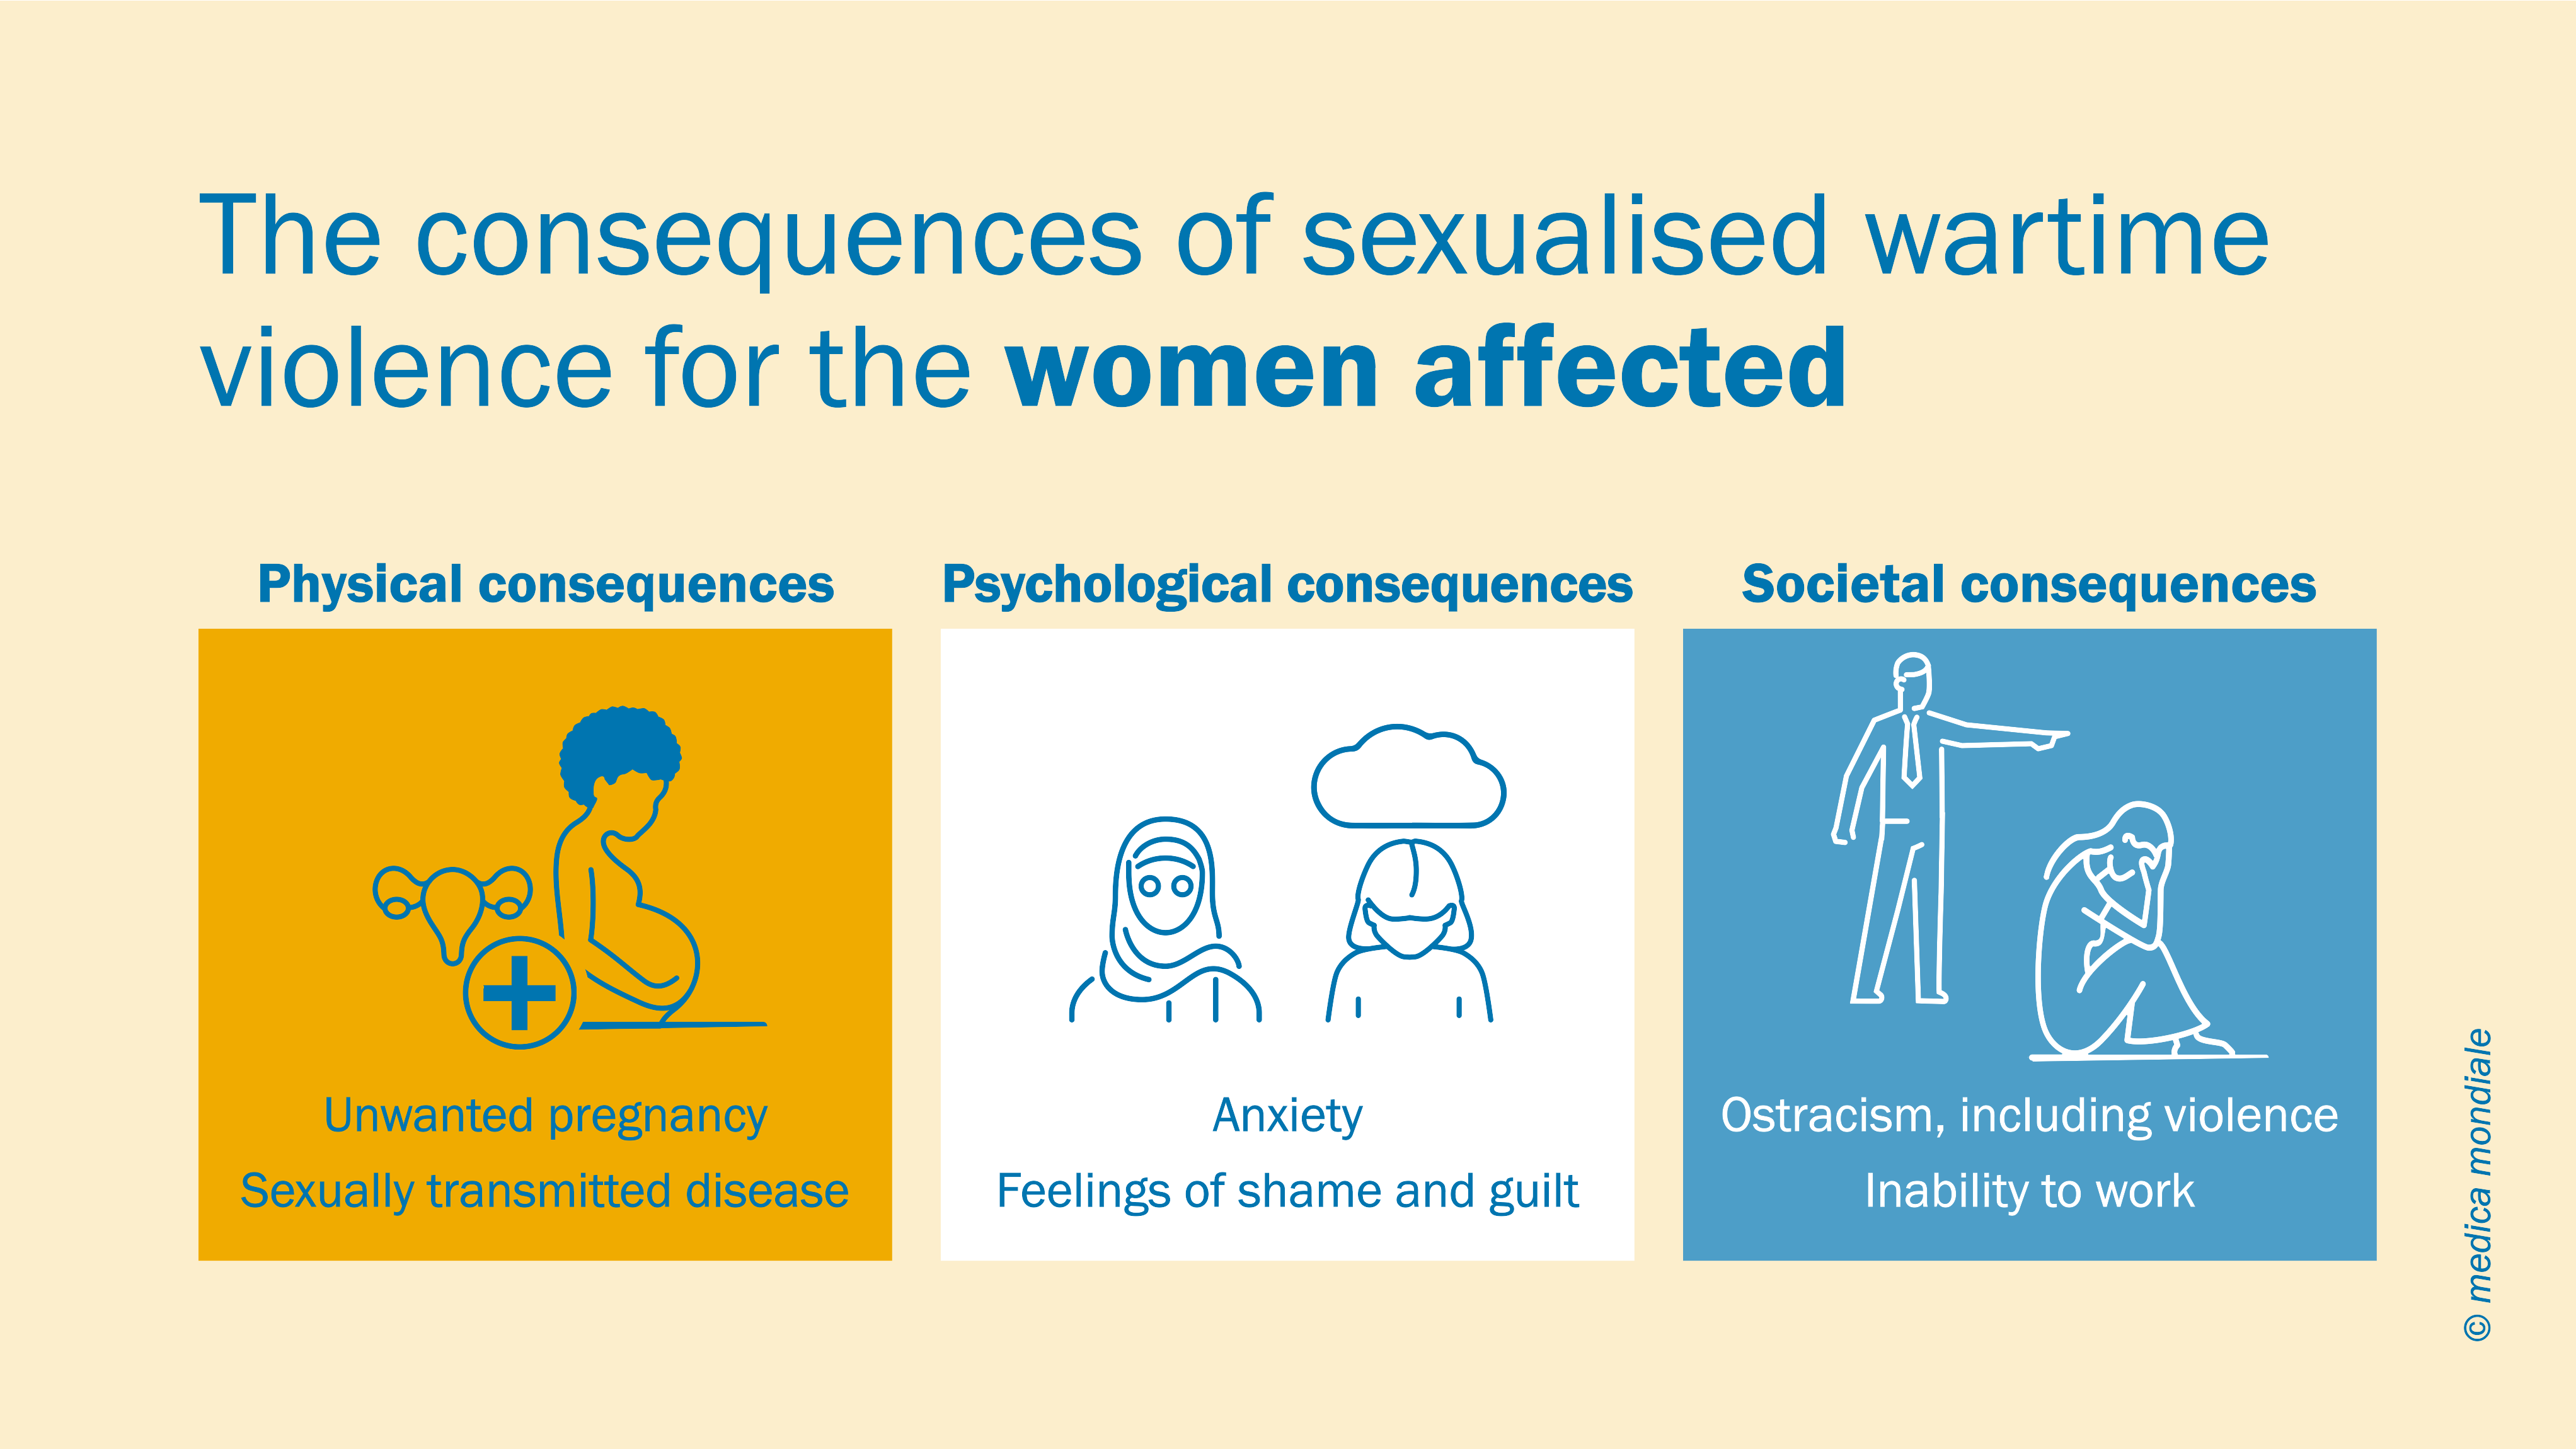 Infographic illustrating the consequences of sexualised wartime violence for affected women.